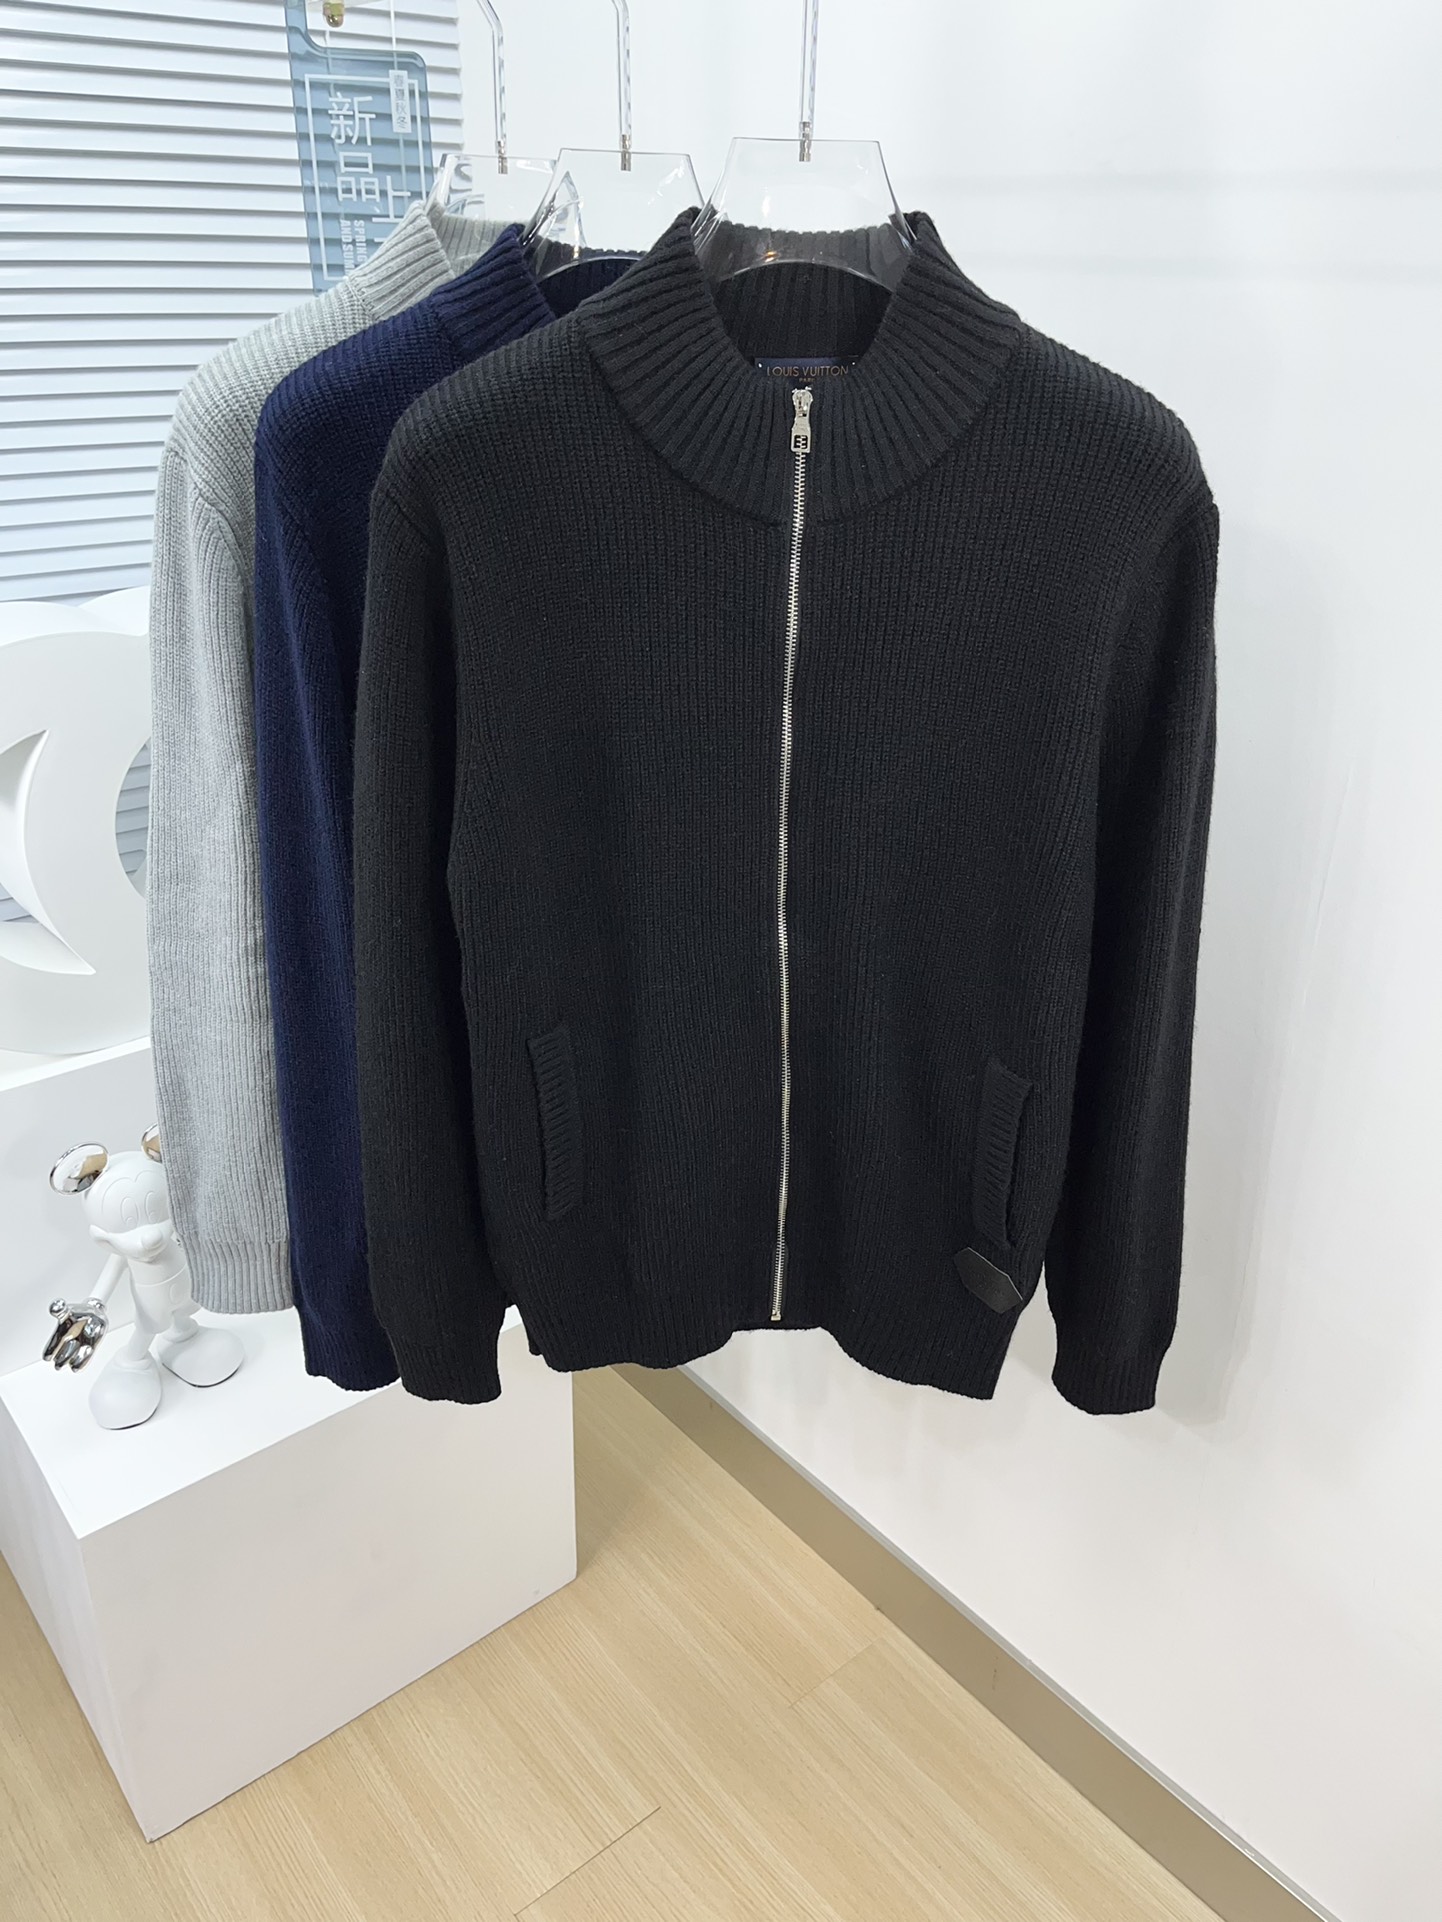 Louis Vuitton Clothing Cardigans Sweatshirts Wool Fall/Winter Collection Fashion Casual